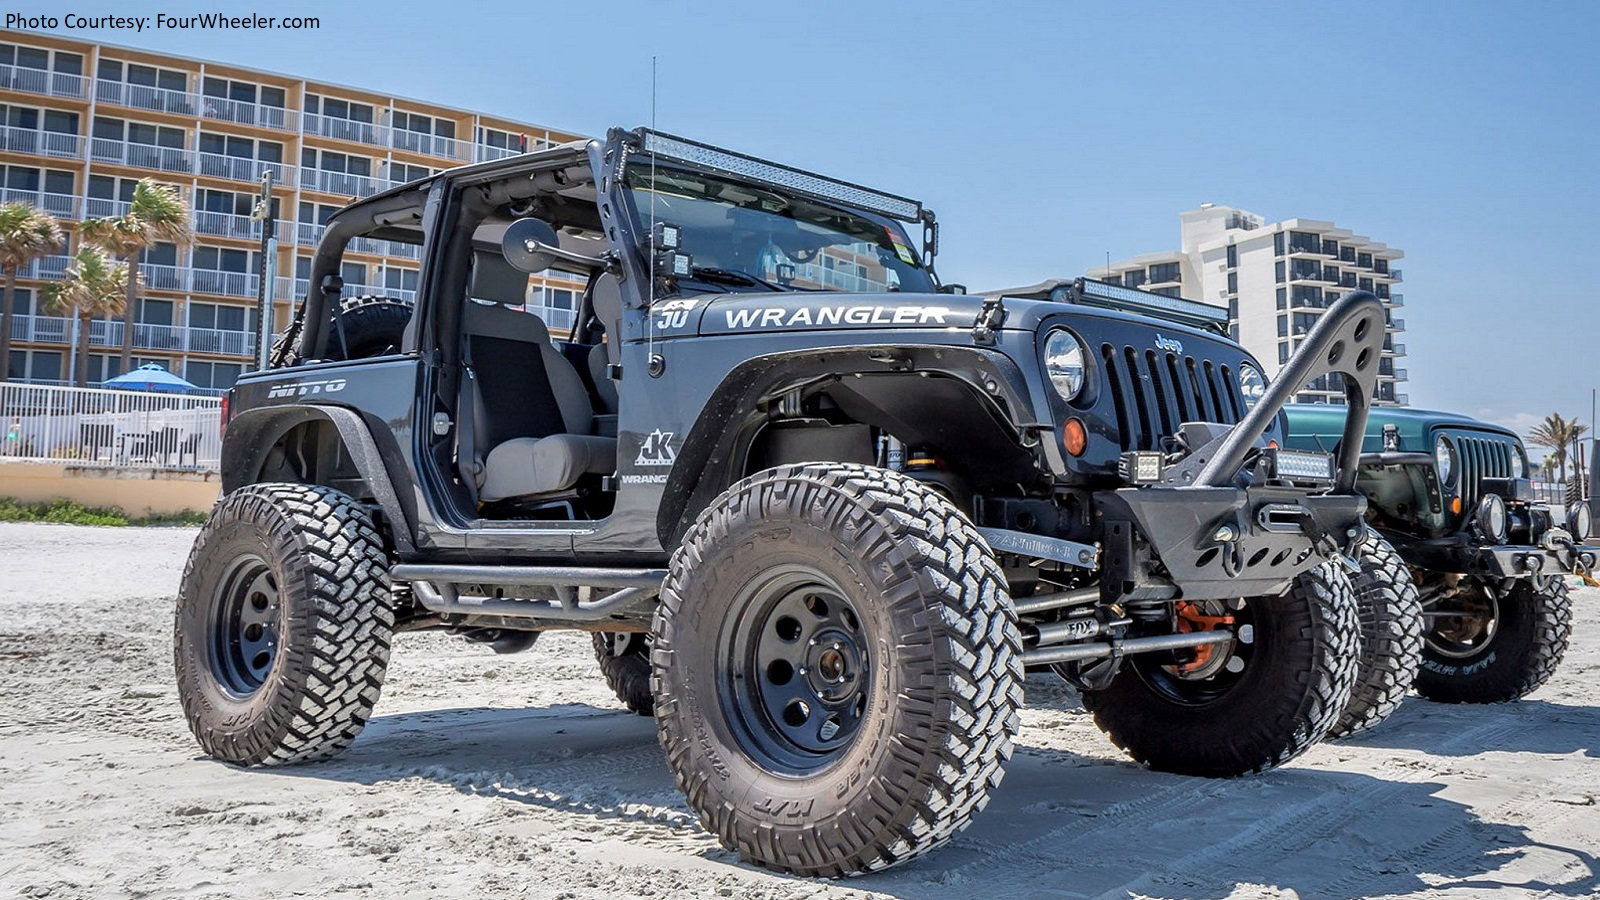 The Annual Jeep Beach Bash is the Best Way to Kill a Summer Weekend